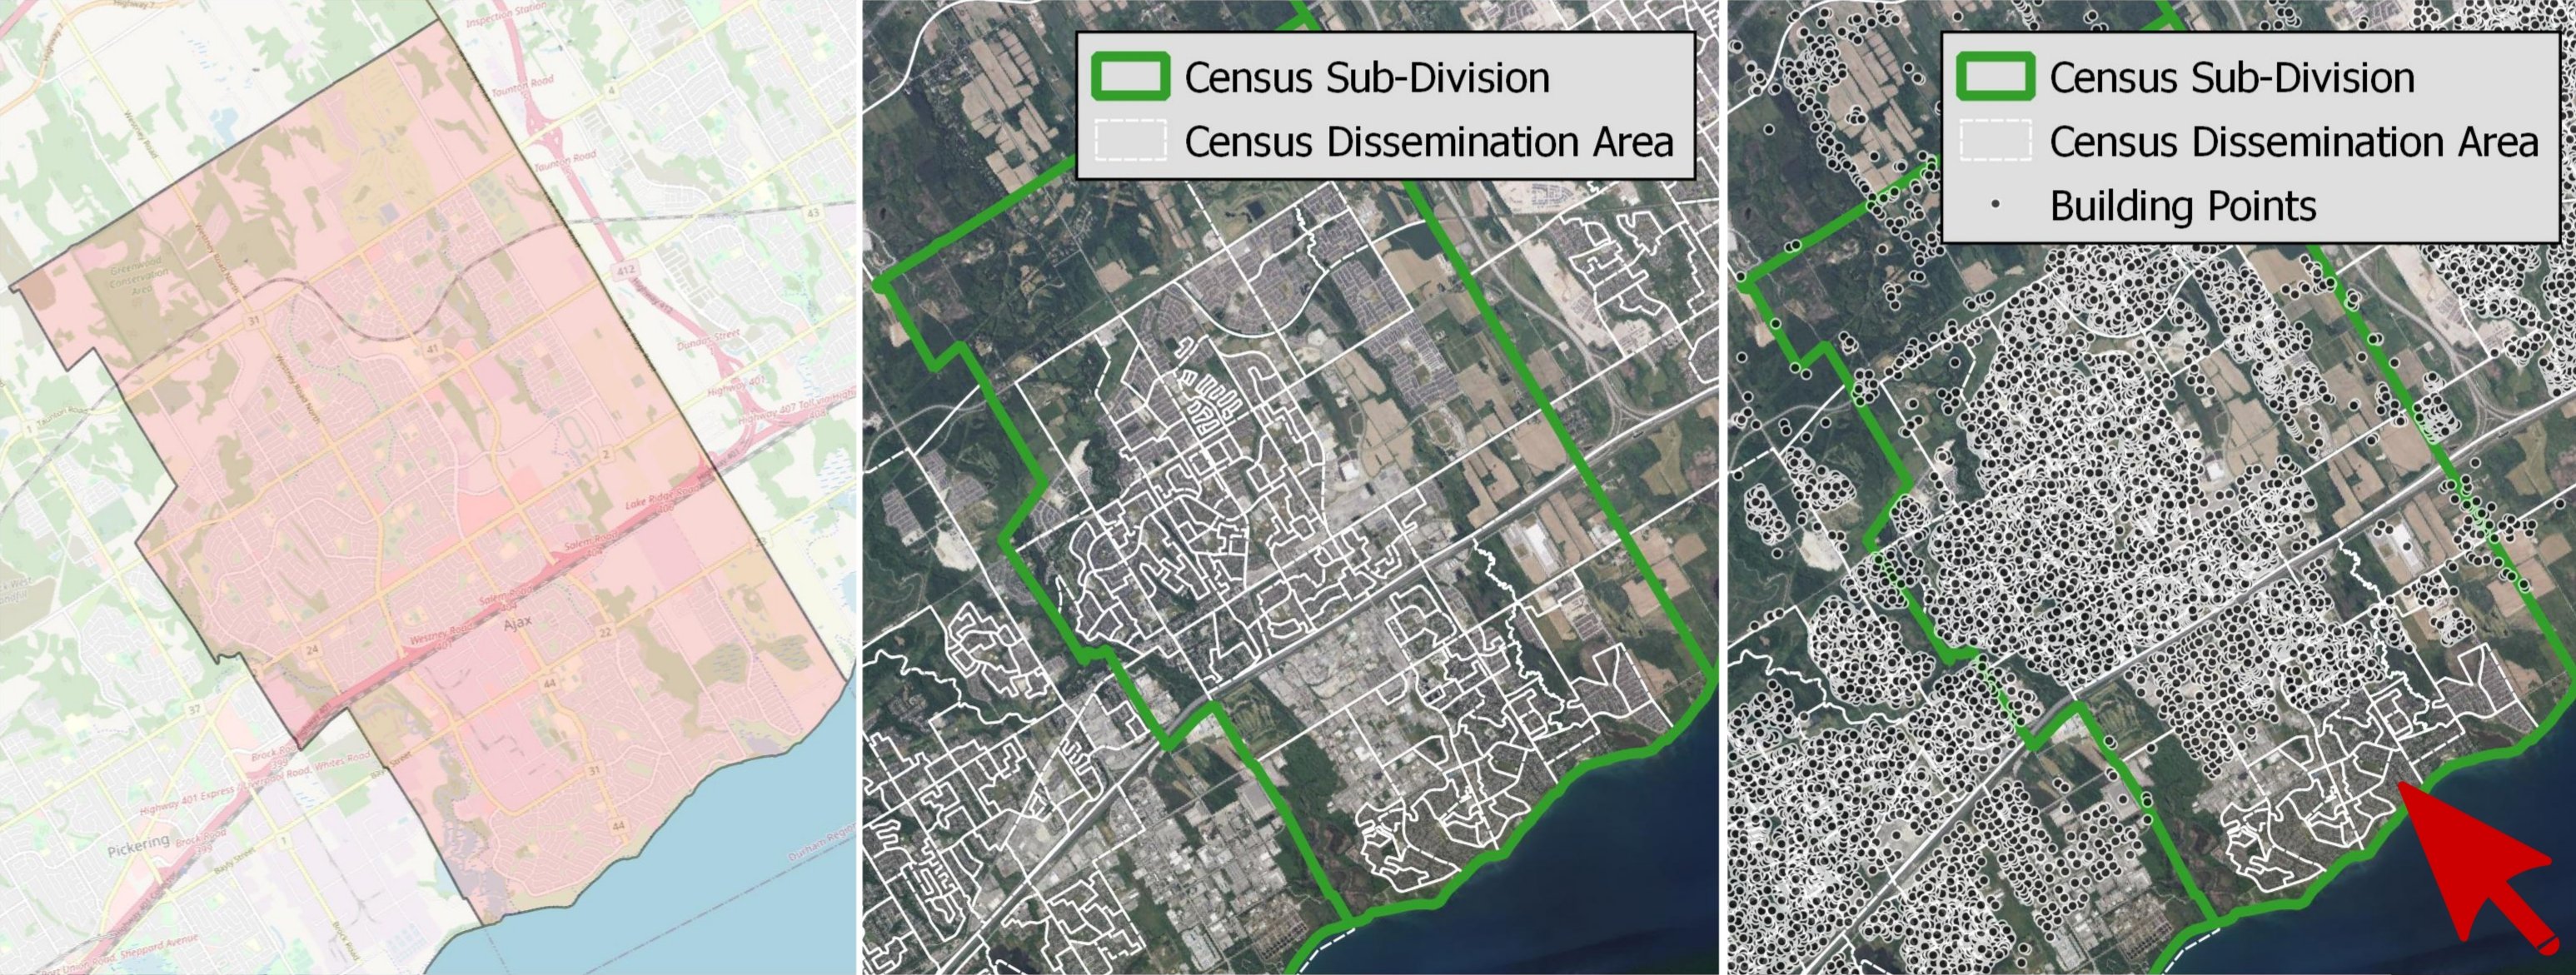 Demonstration of building points missing in a dissemination area (Ajax, ON)